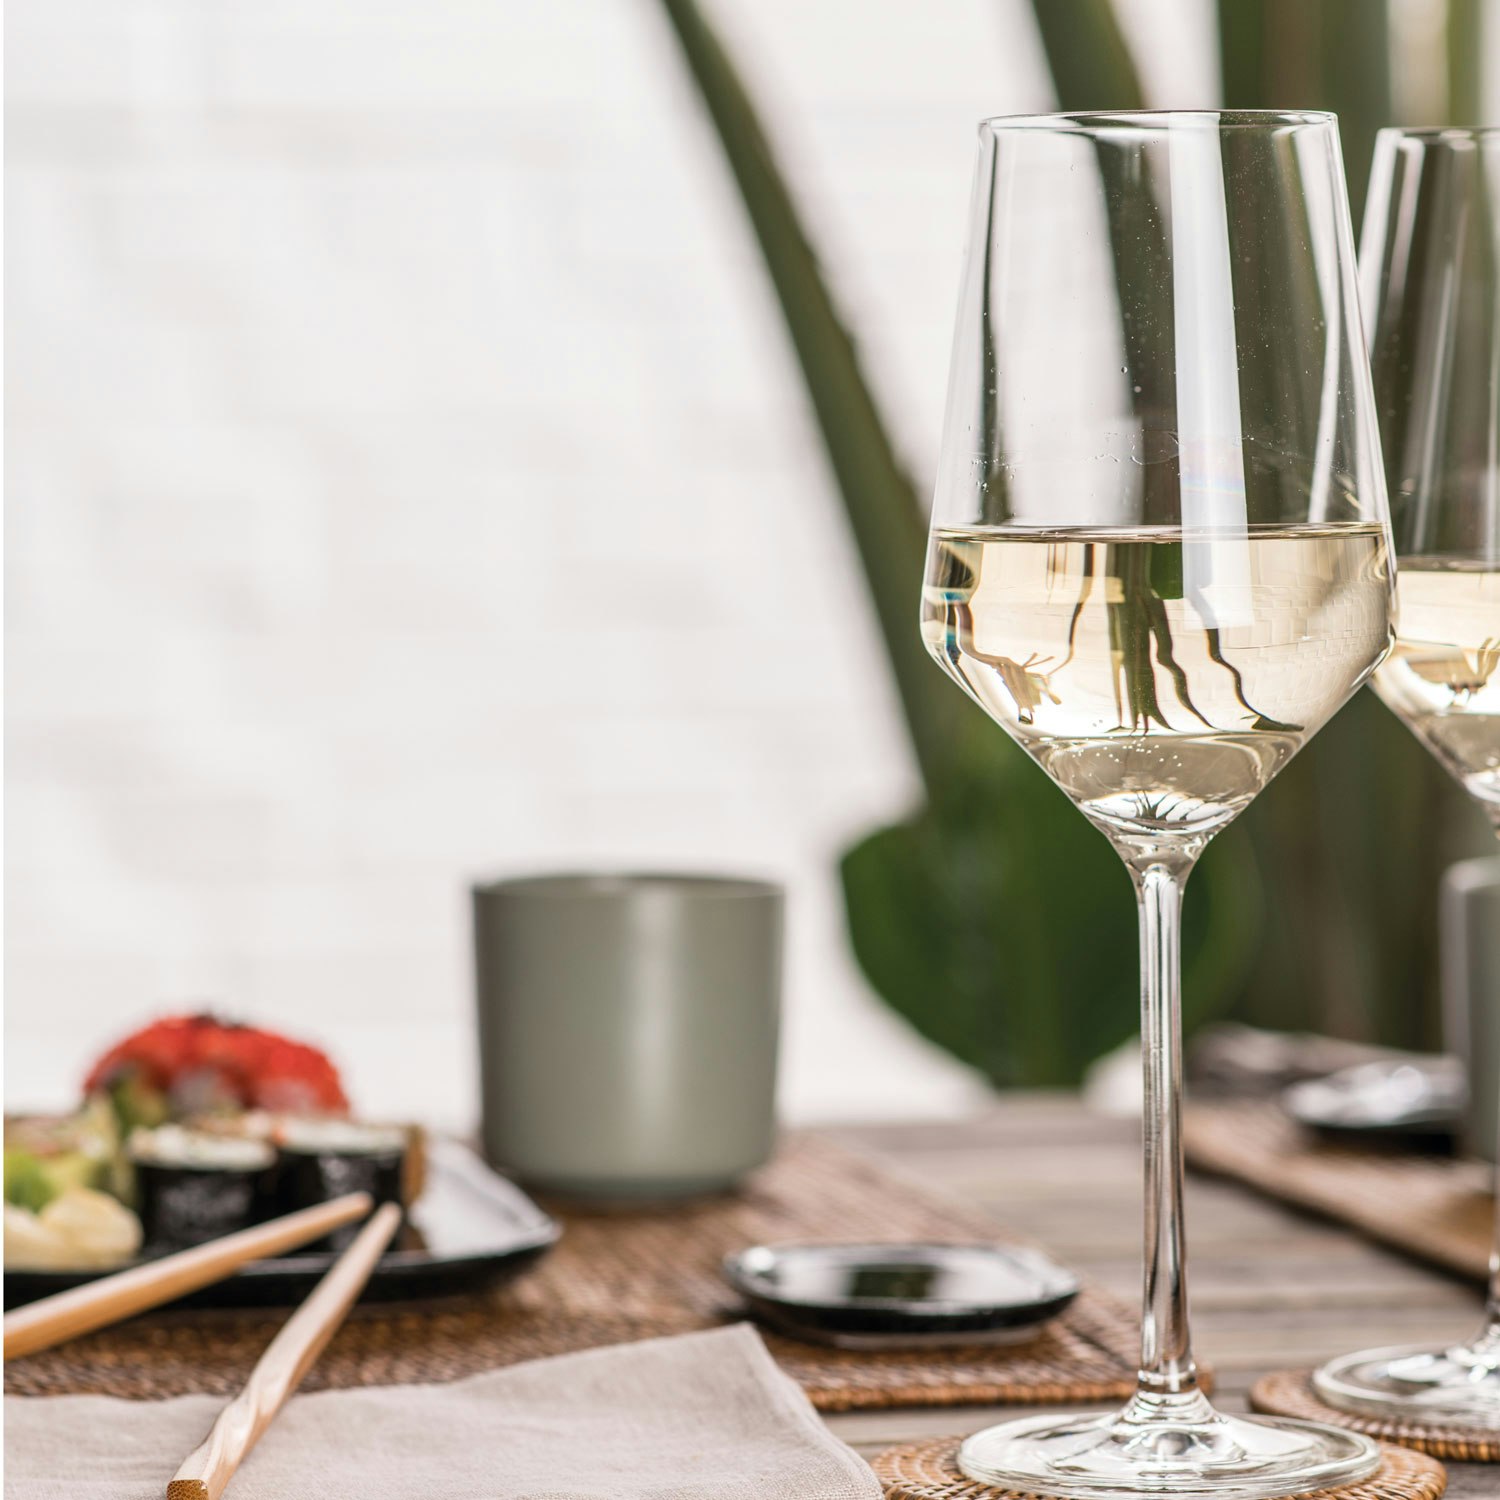 Sublym White Wine Glass 25 cl, 6-pack - Chef&Sommelier @ RoyalDesign